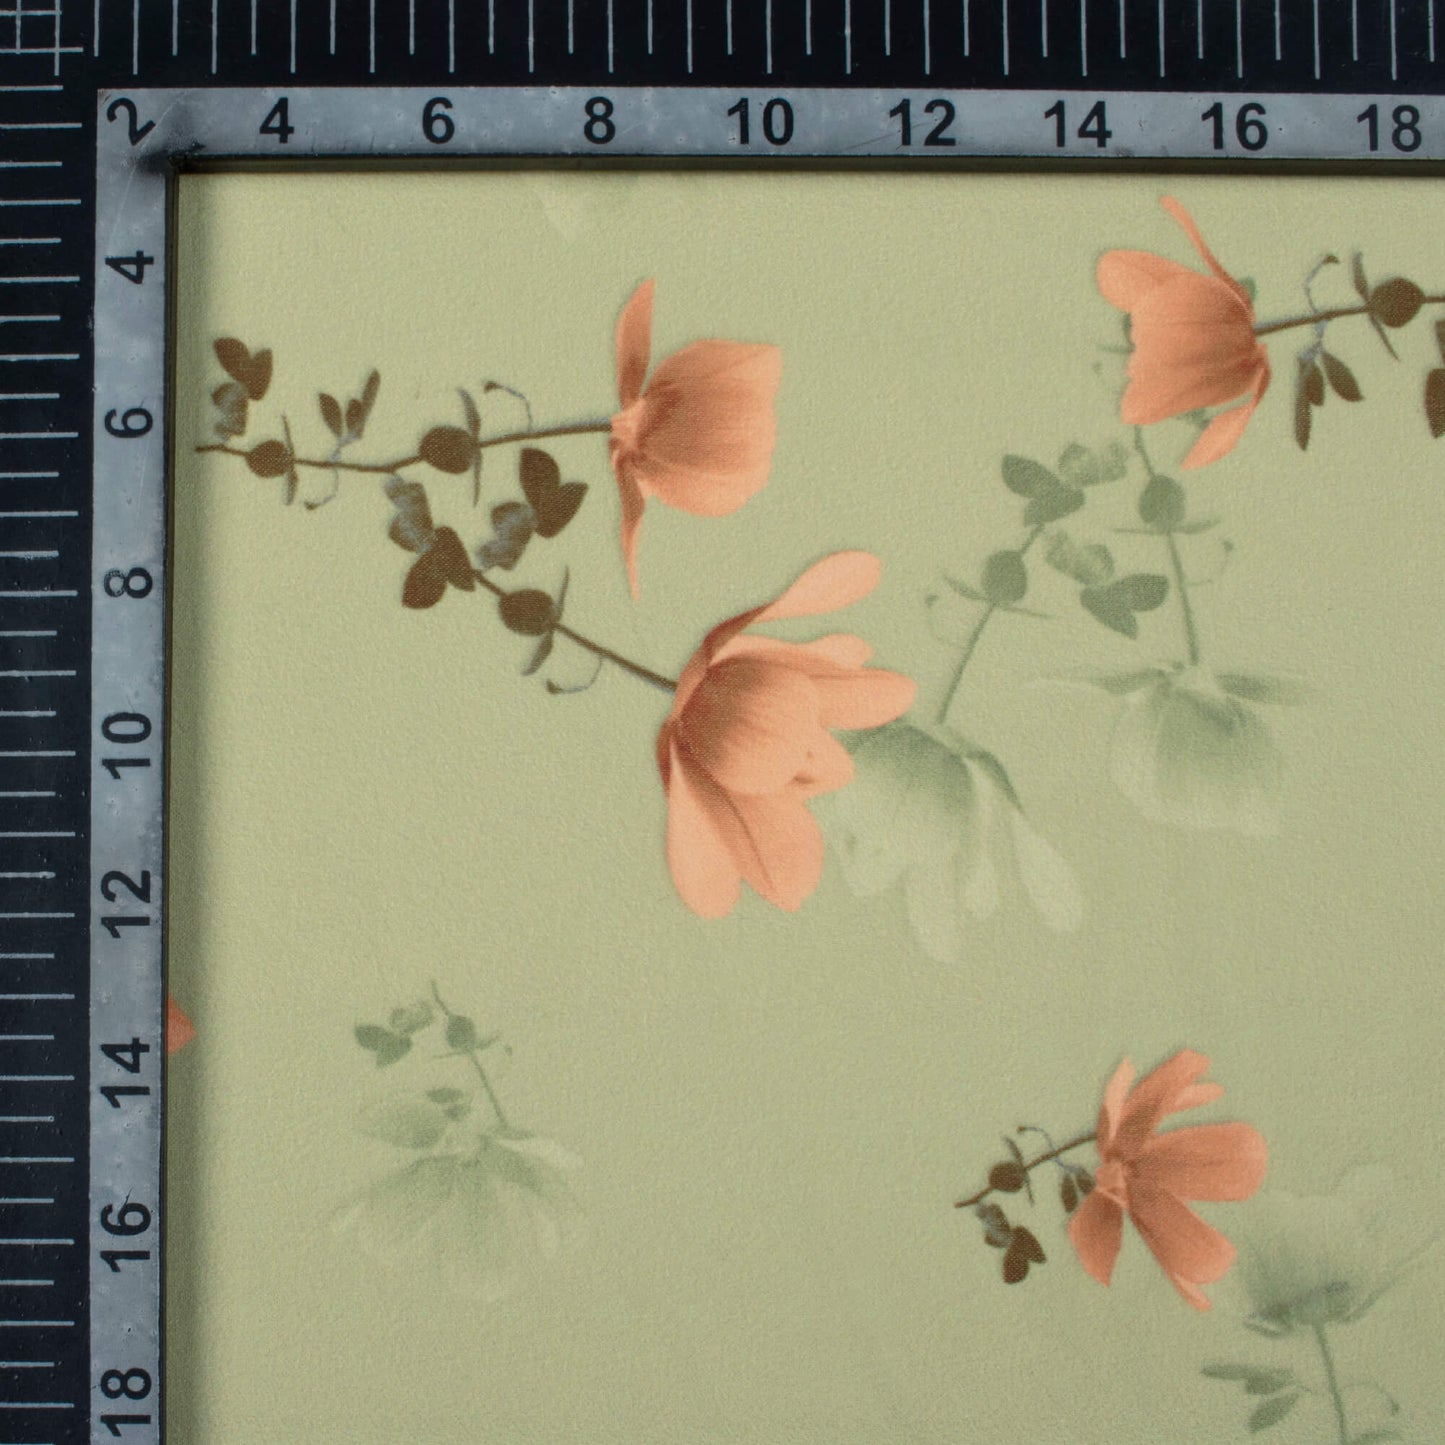 Moss Green And Peach Floral Pattern Digital Print Georgette Fabric